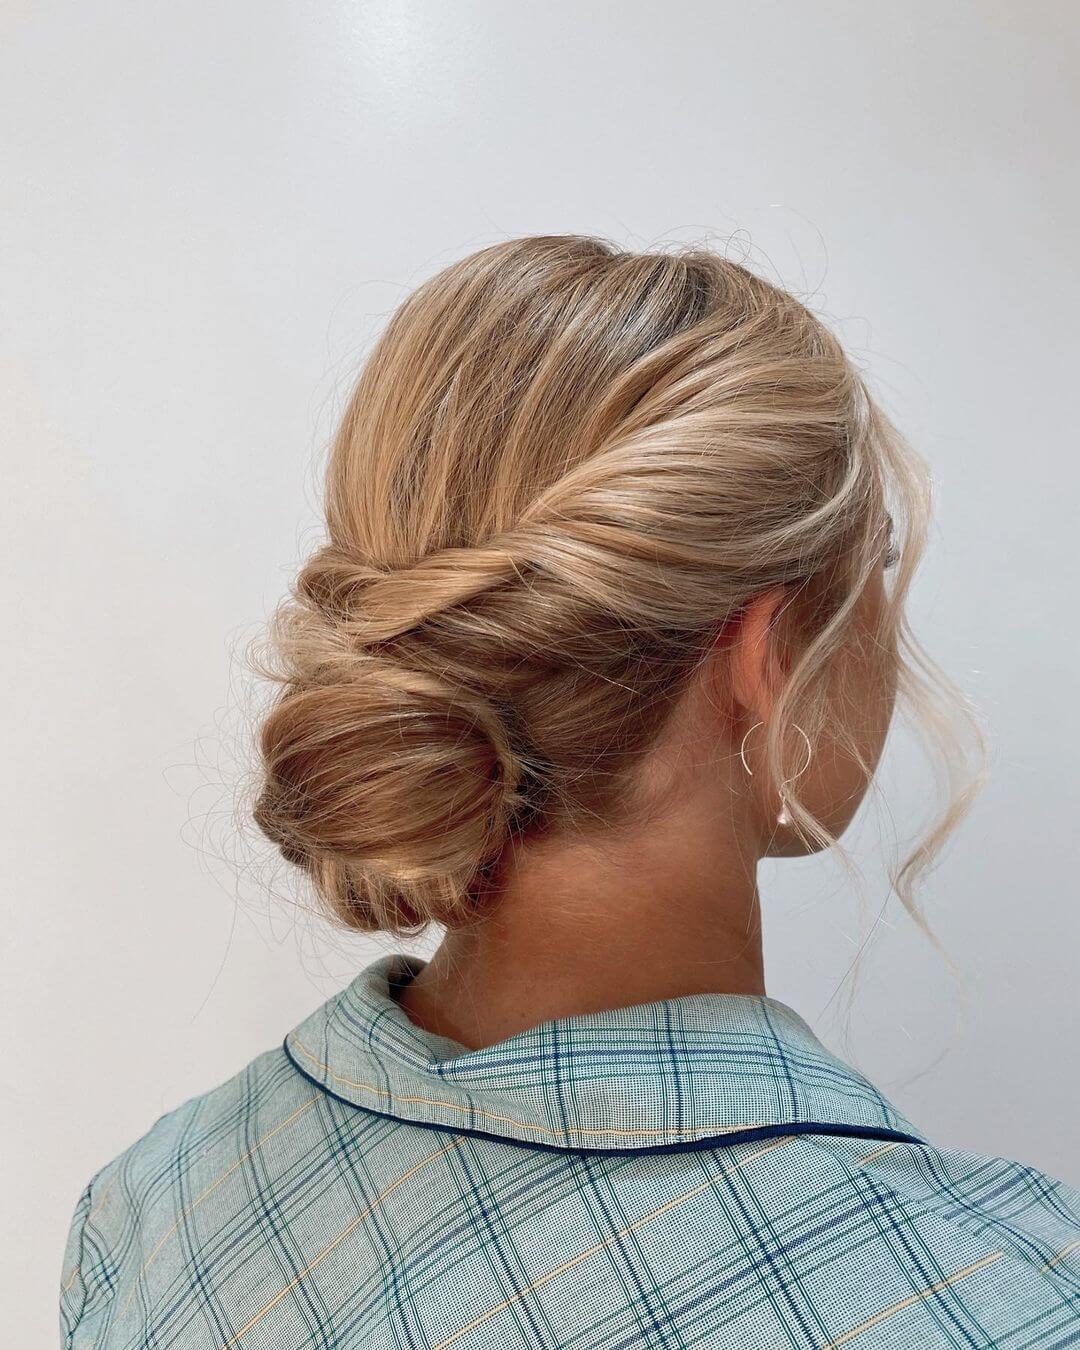 Professional Job Interview Hairstyles for a Great Formal Look Formal Bun Hairstyle with Twisted Braids